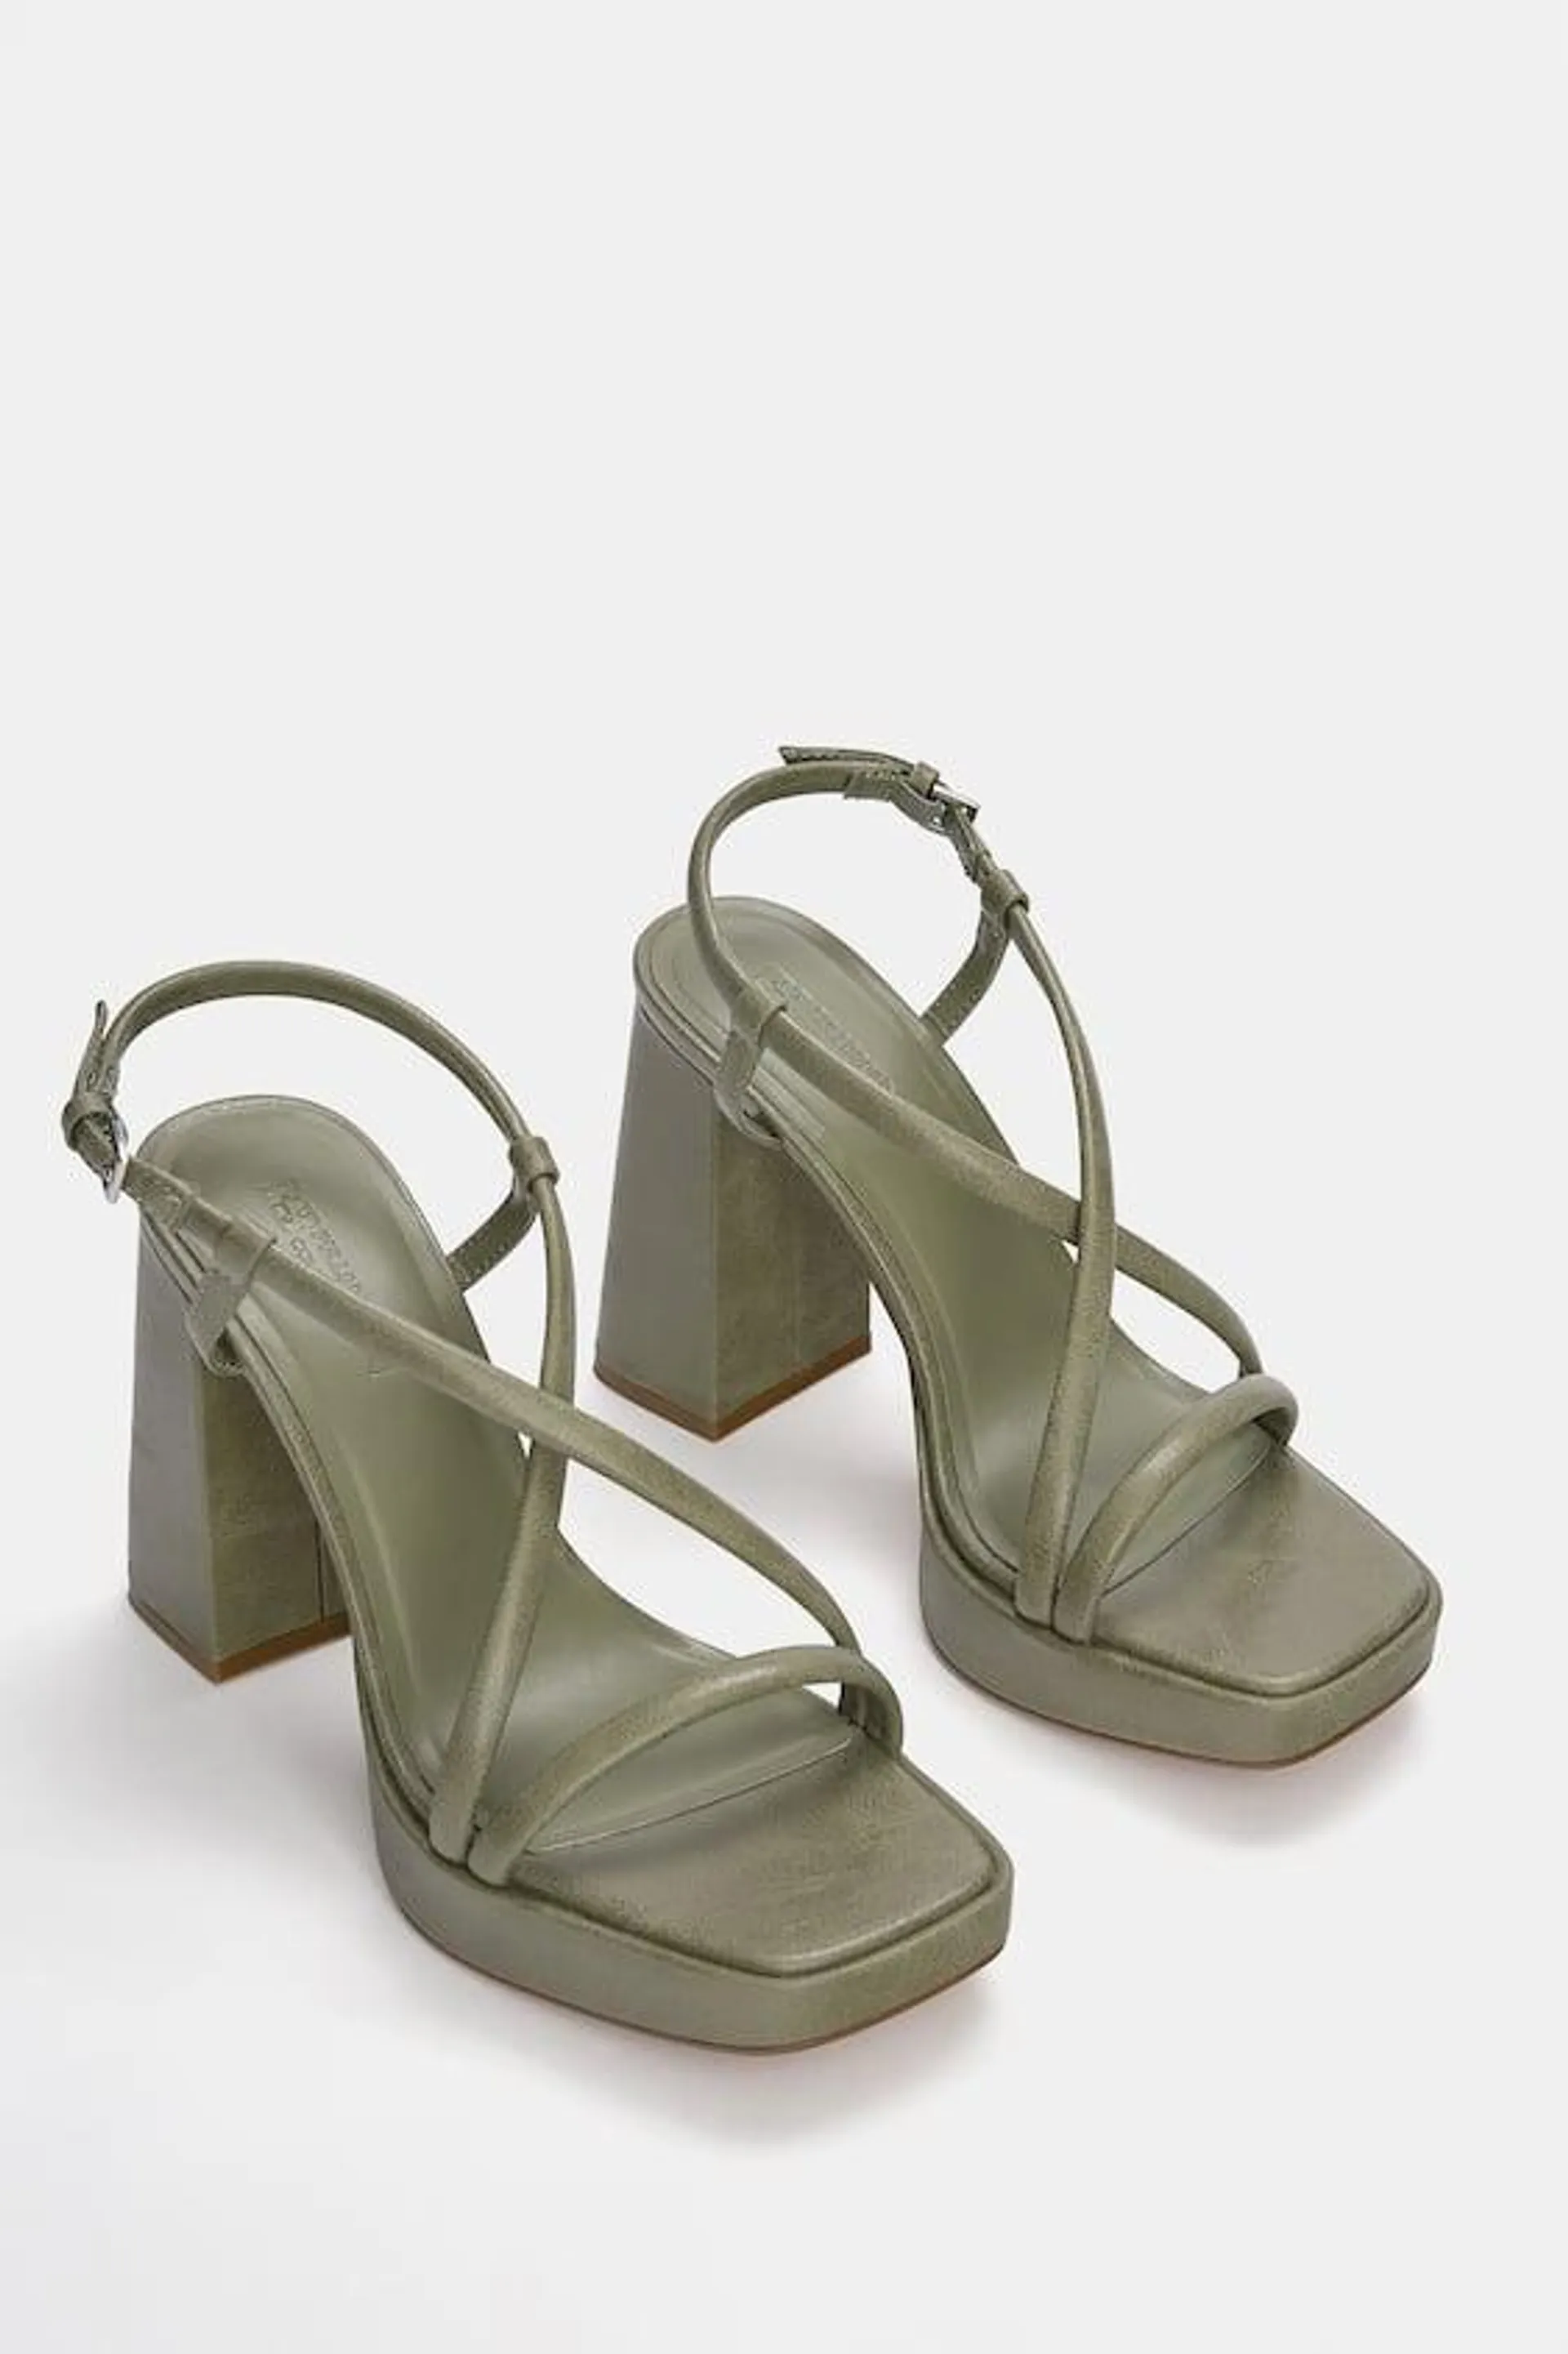 Heeled sandals with crossover straps